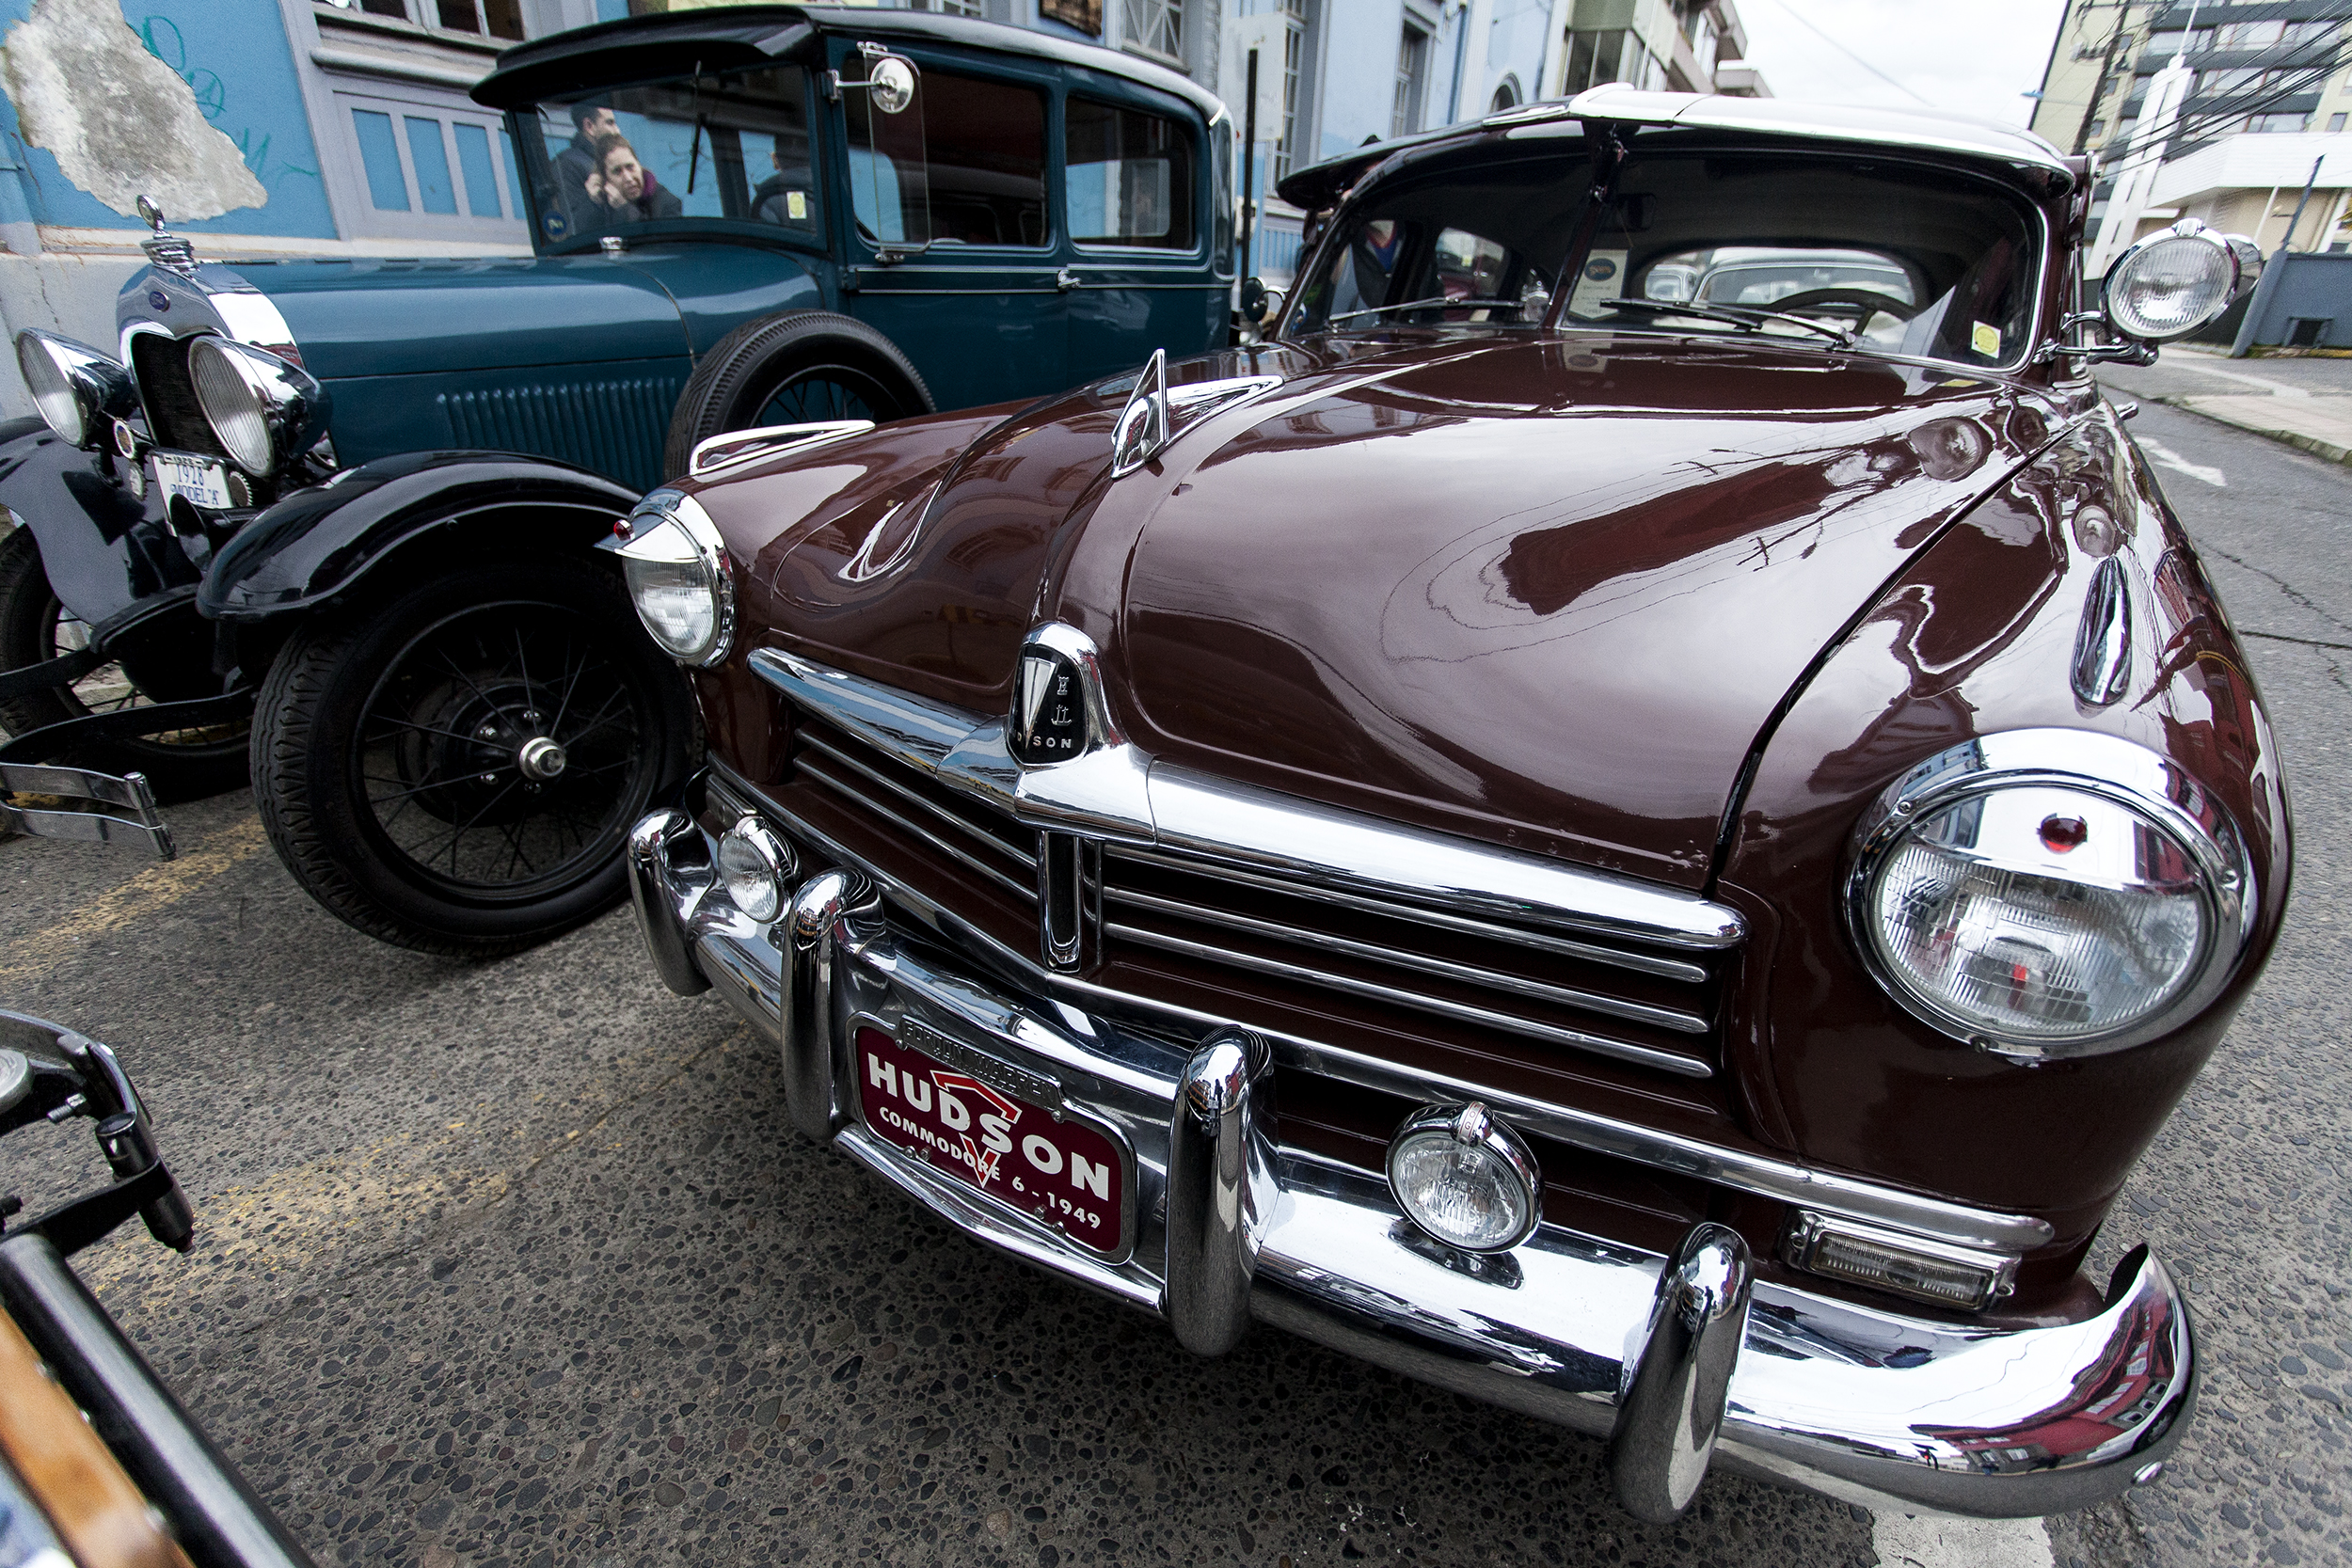 Front view of maroon 1949 Hudson Commodore